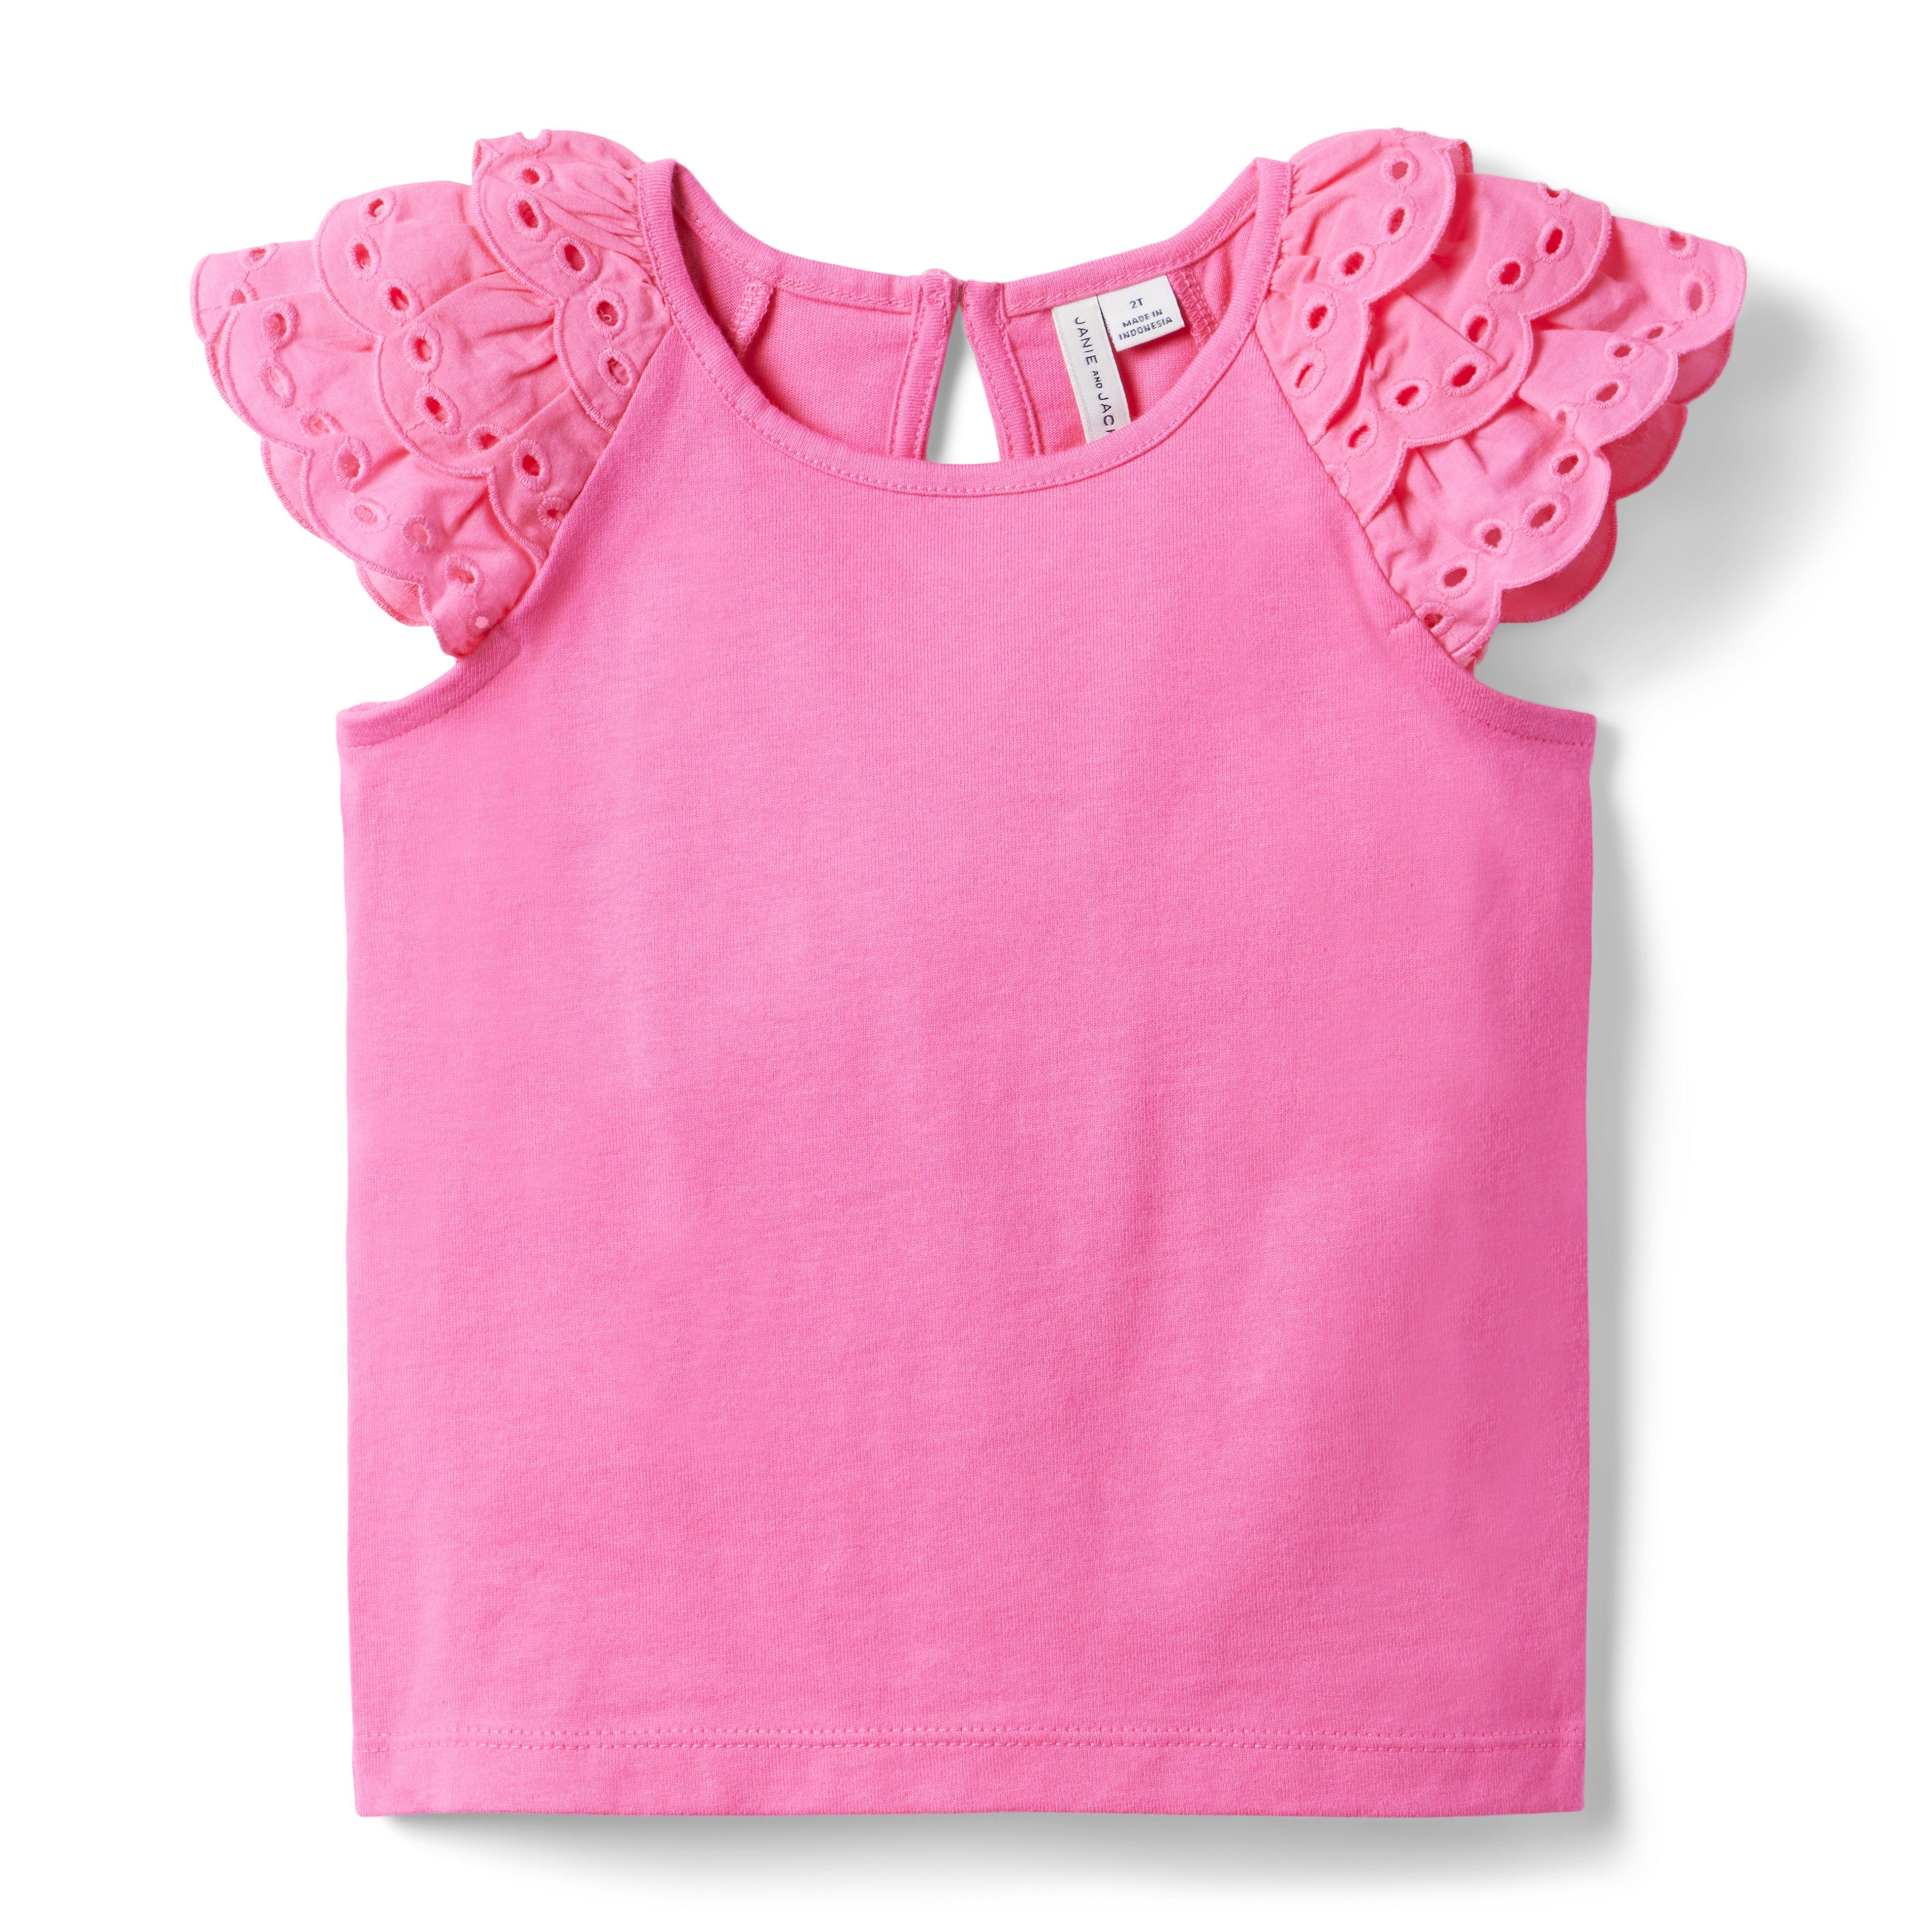 Girl Pink Convertible Eyelet Sleeve Jersey Top by Janie and Jack